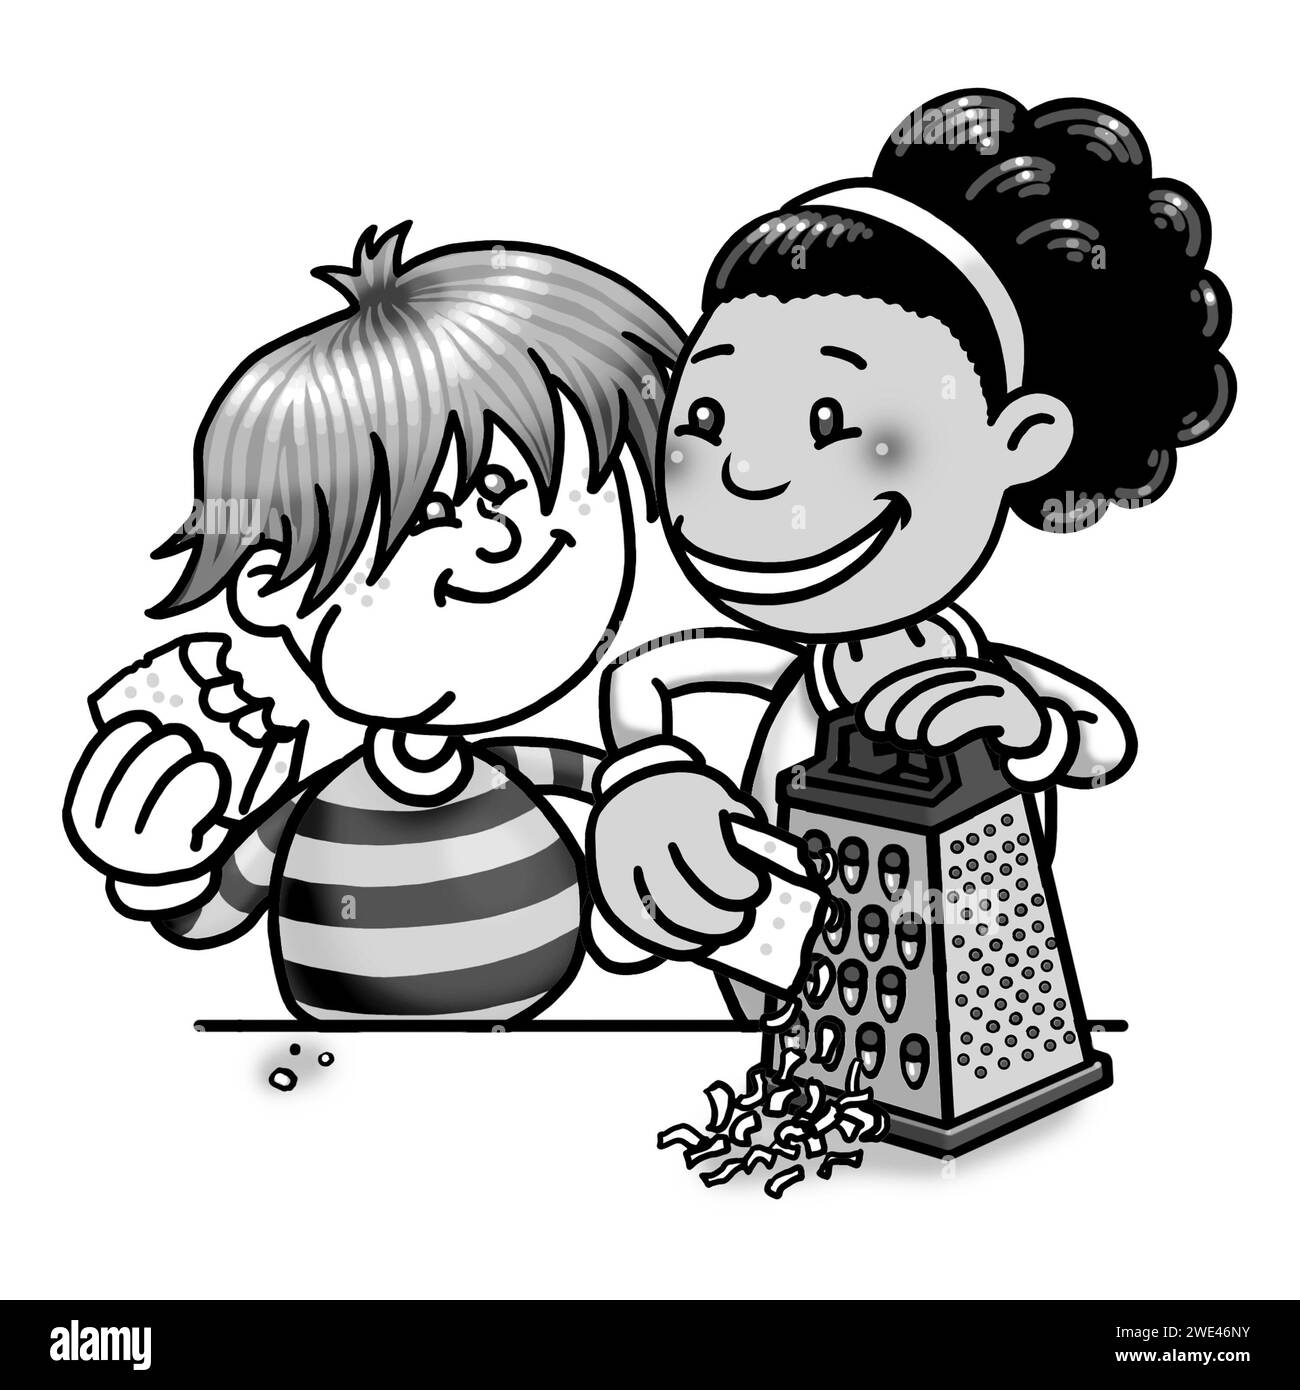 Black & white art illustration, children cooking together, black girl, white boy, using a grater, grating cheese, eating cheese, educational activies Stock Photo